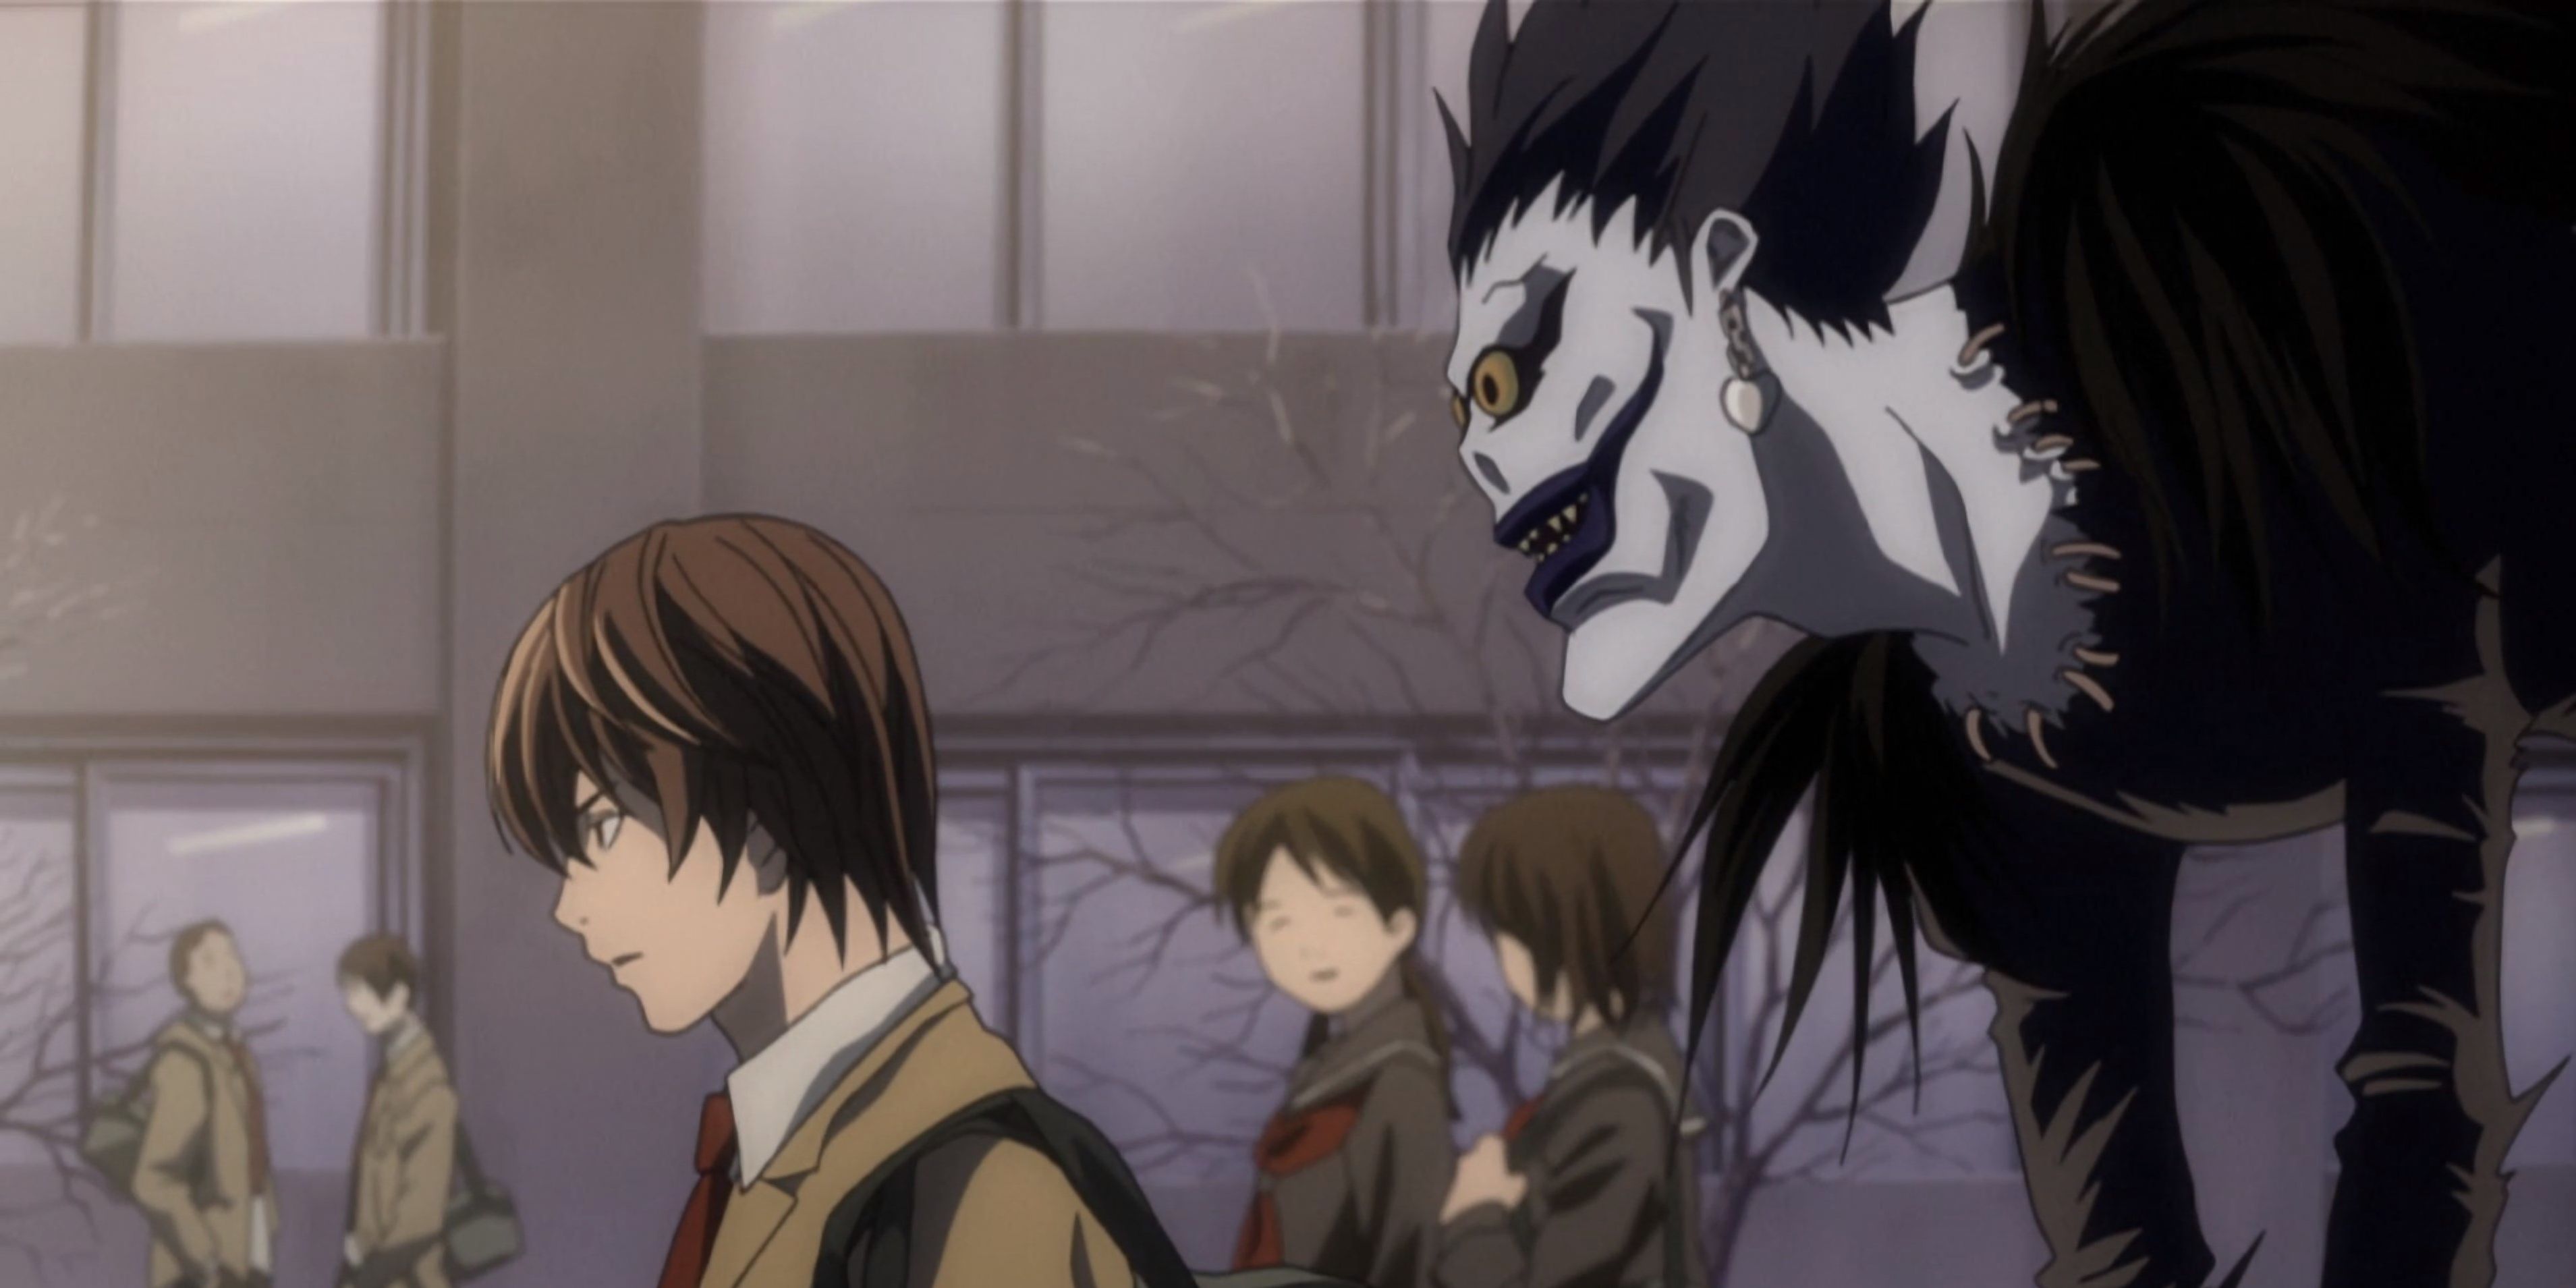 Light Yagami an Ryuk from Death Note